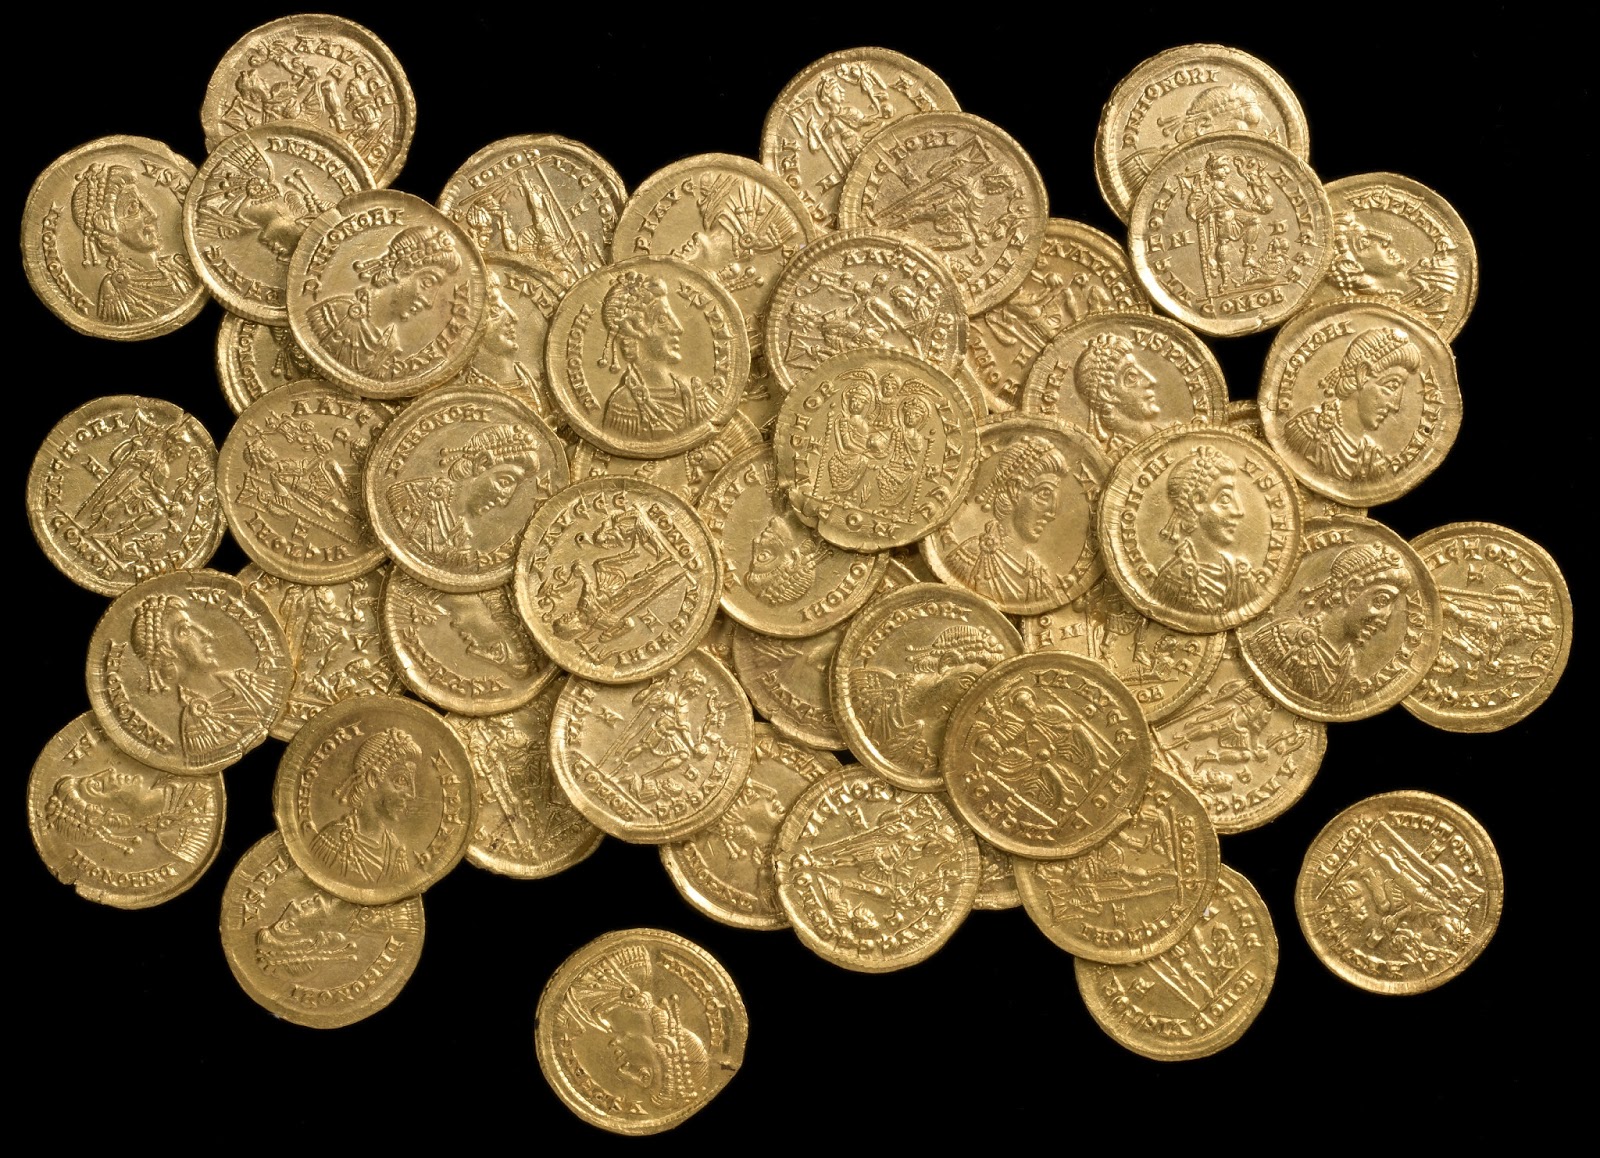 Roman Coins Wiki Roman Coins Forum Ancient Coins Your Search Query Download To On A Forum Projectsforschool Com - roblox wiki hk